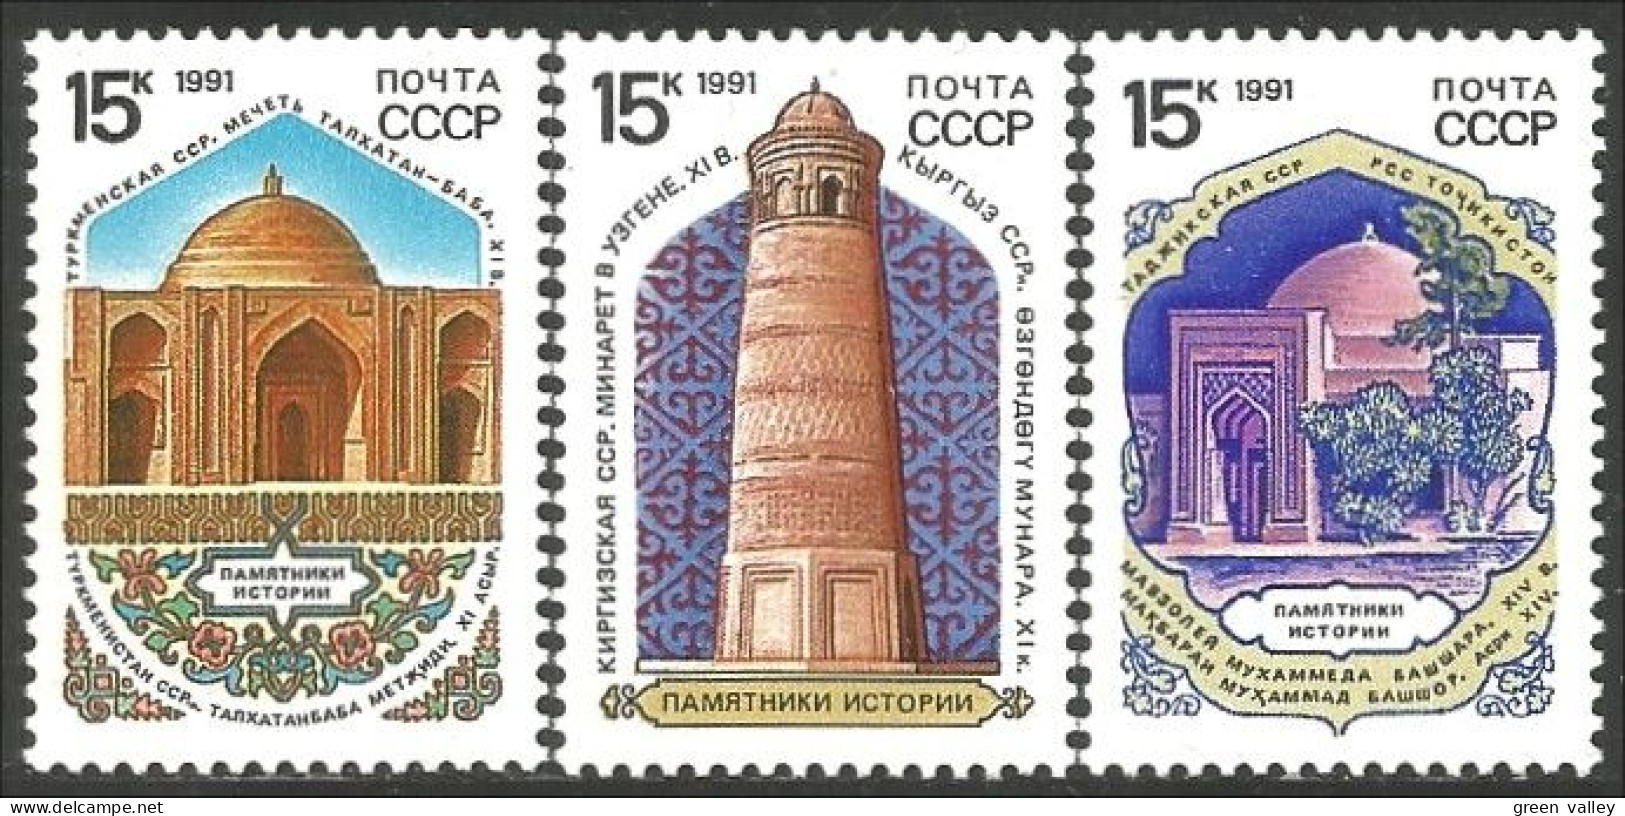 772 Russie 1991 Mosquées Mosques Mosks MNH ** Neuf SC (RUC-396) - Neufs